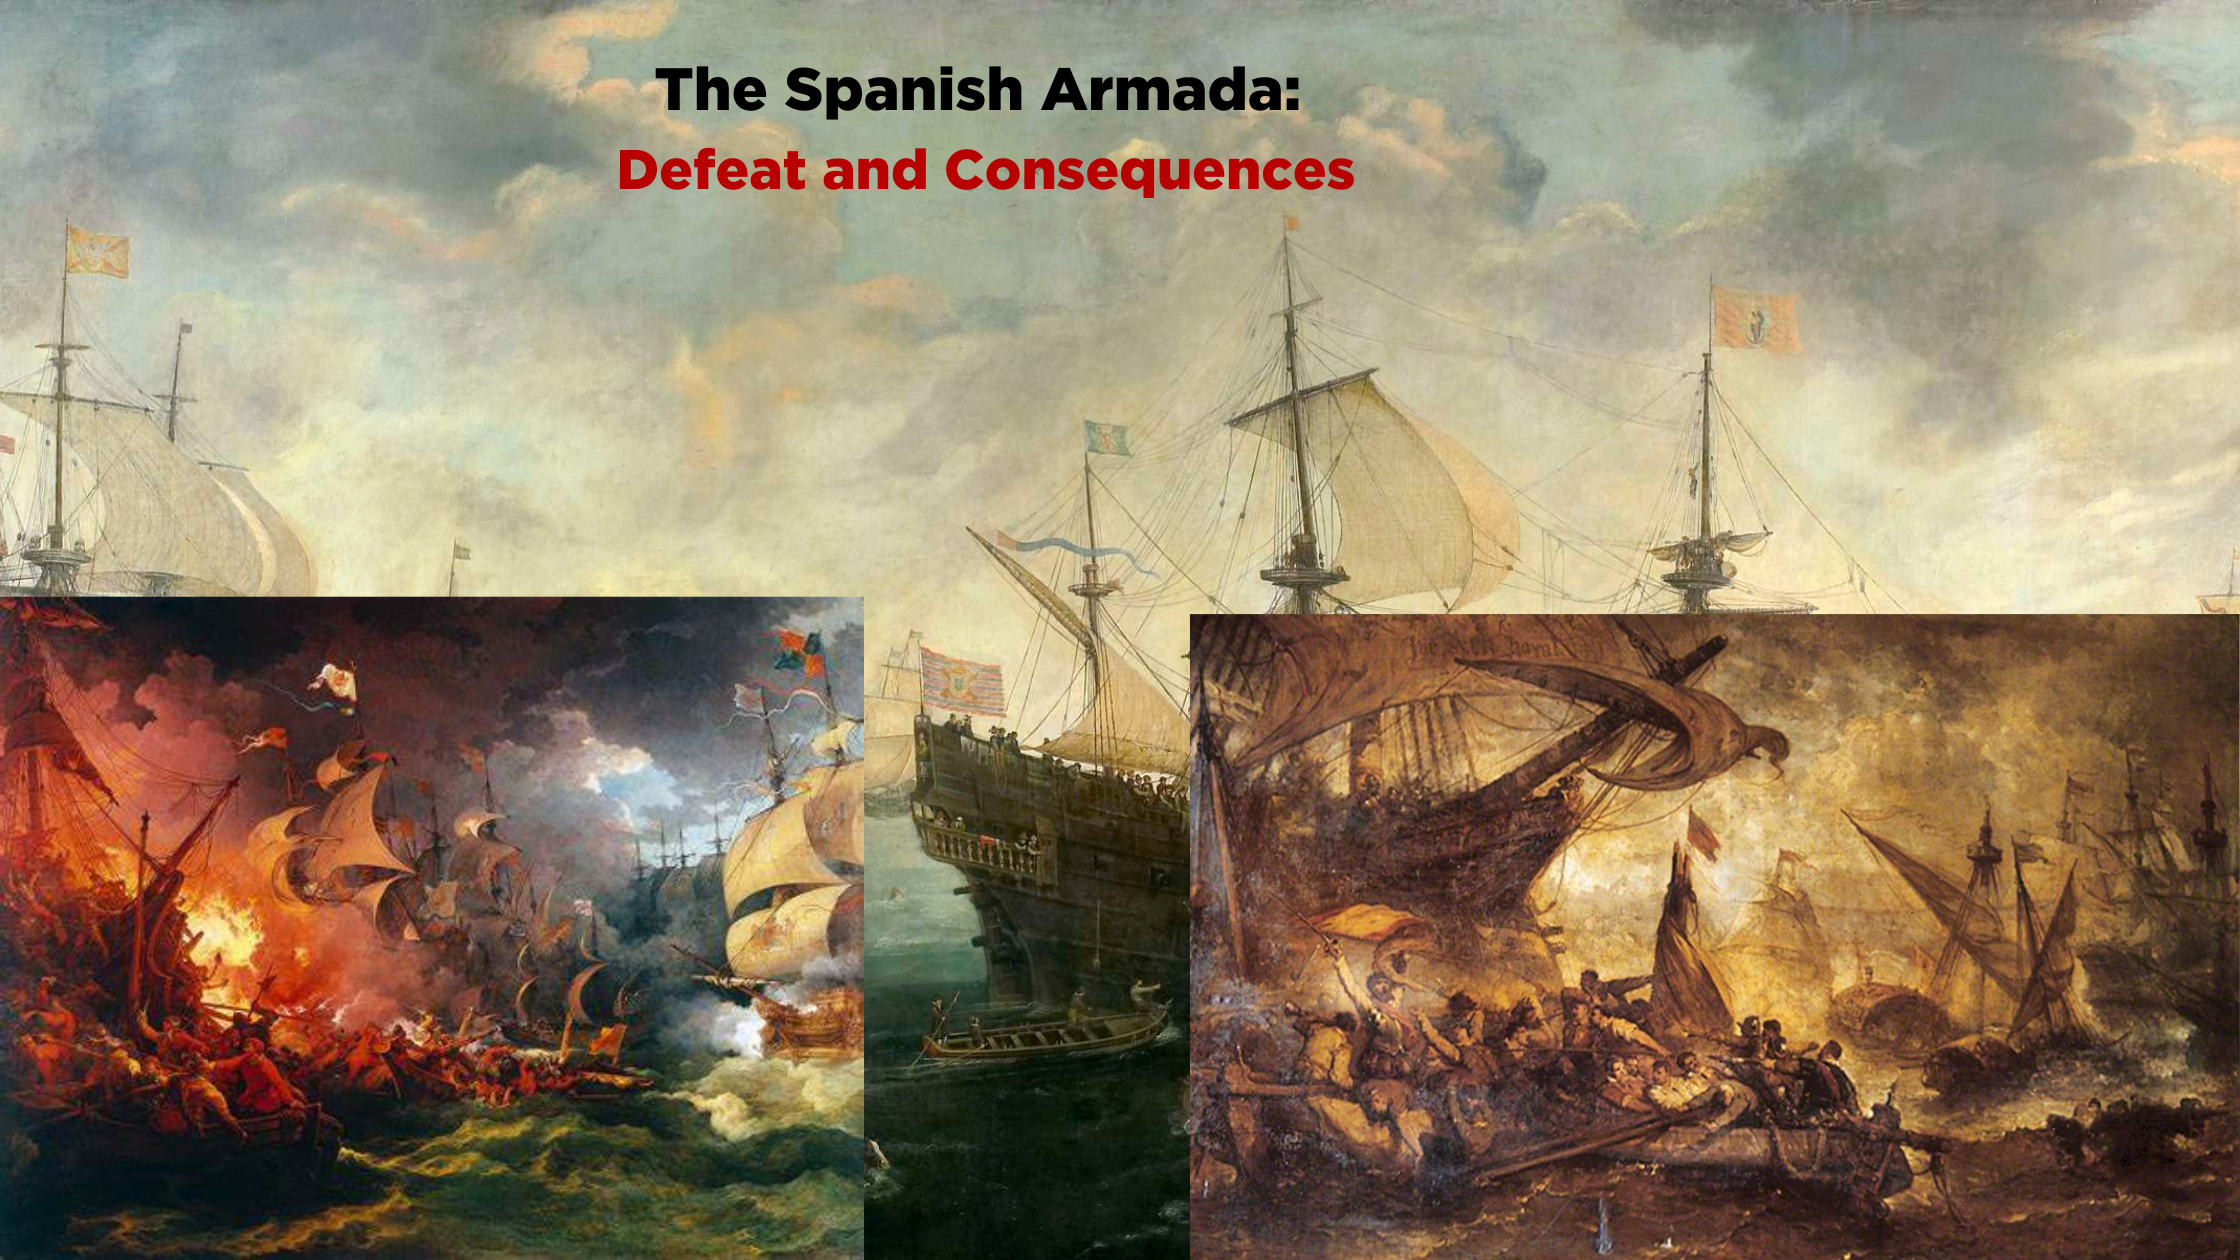 The Spanish Armada: Defeat and Consequences